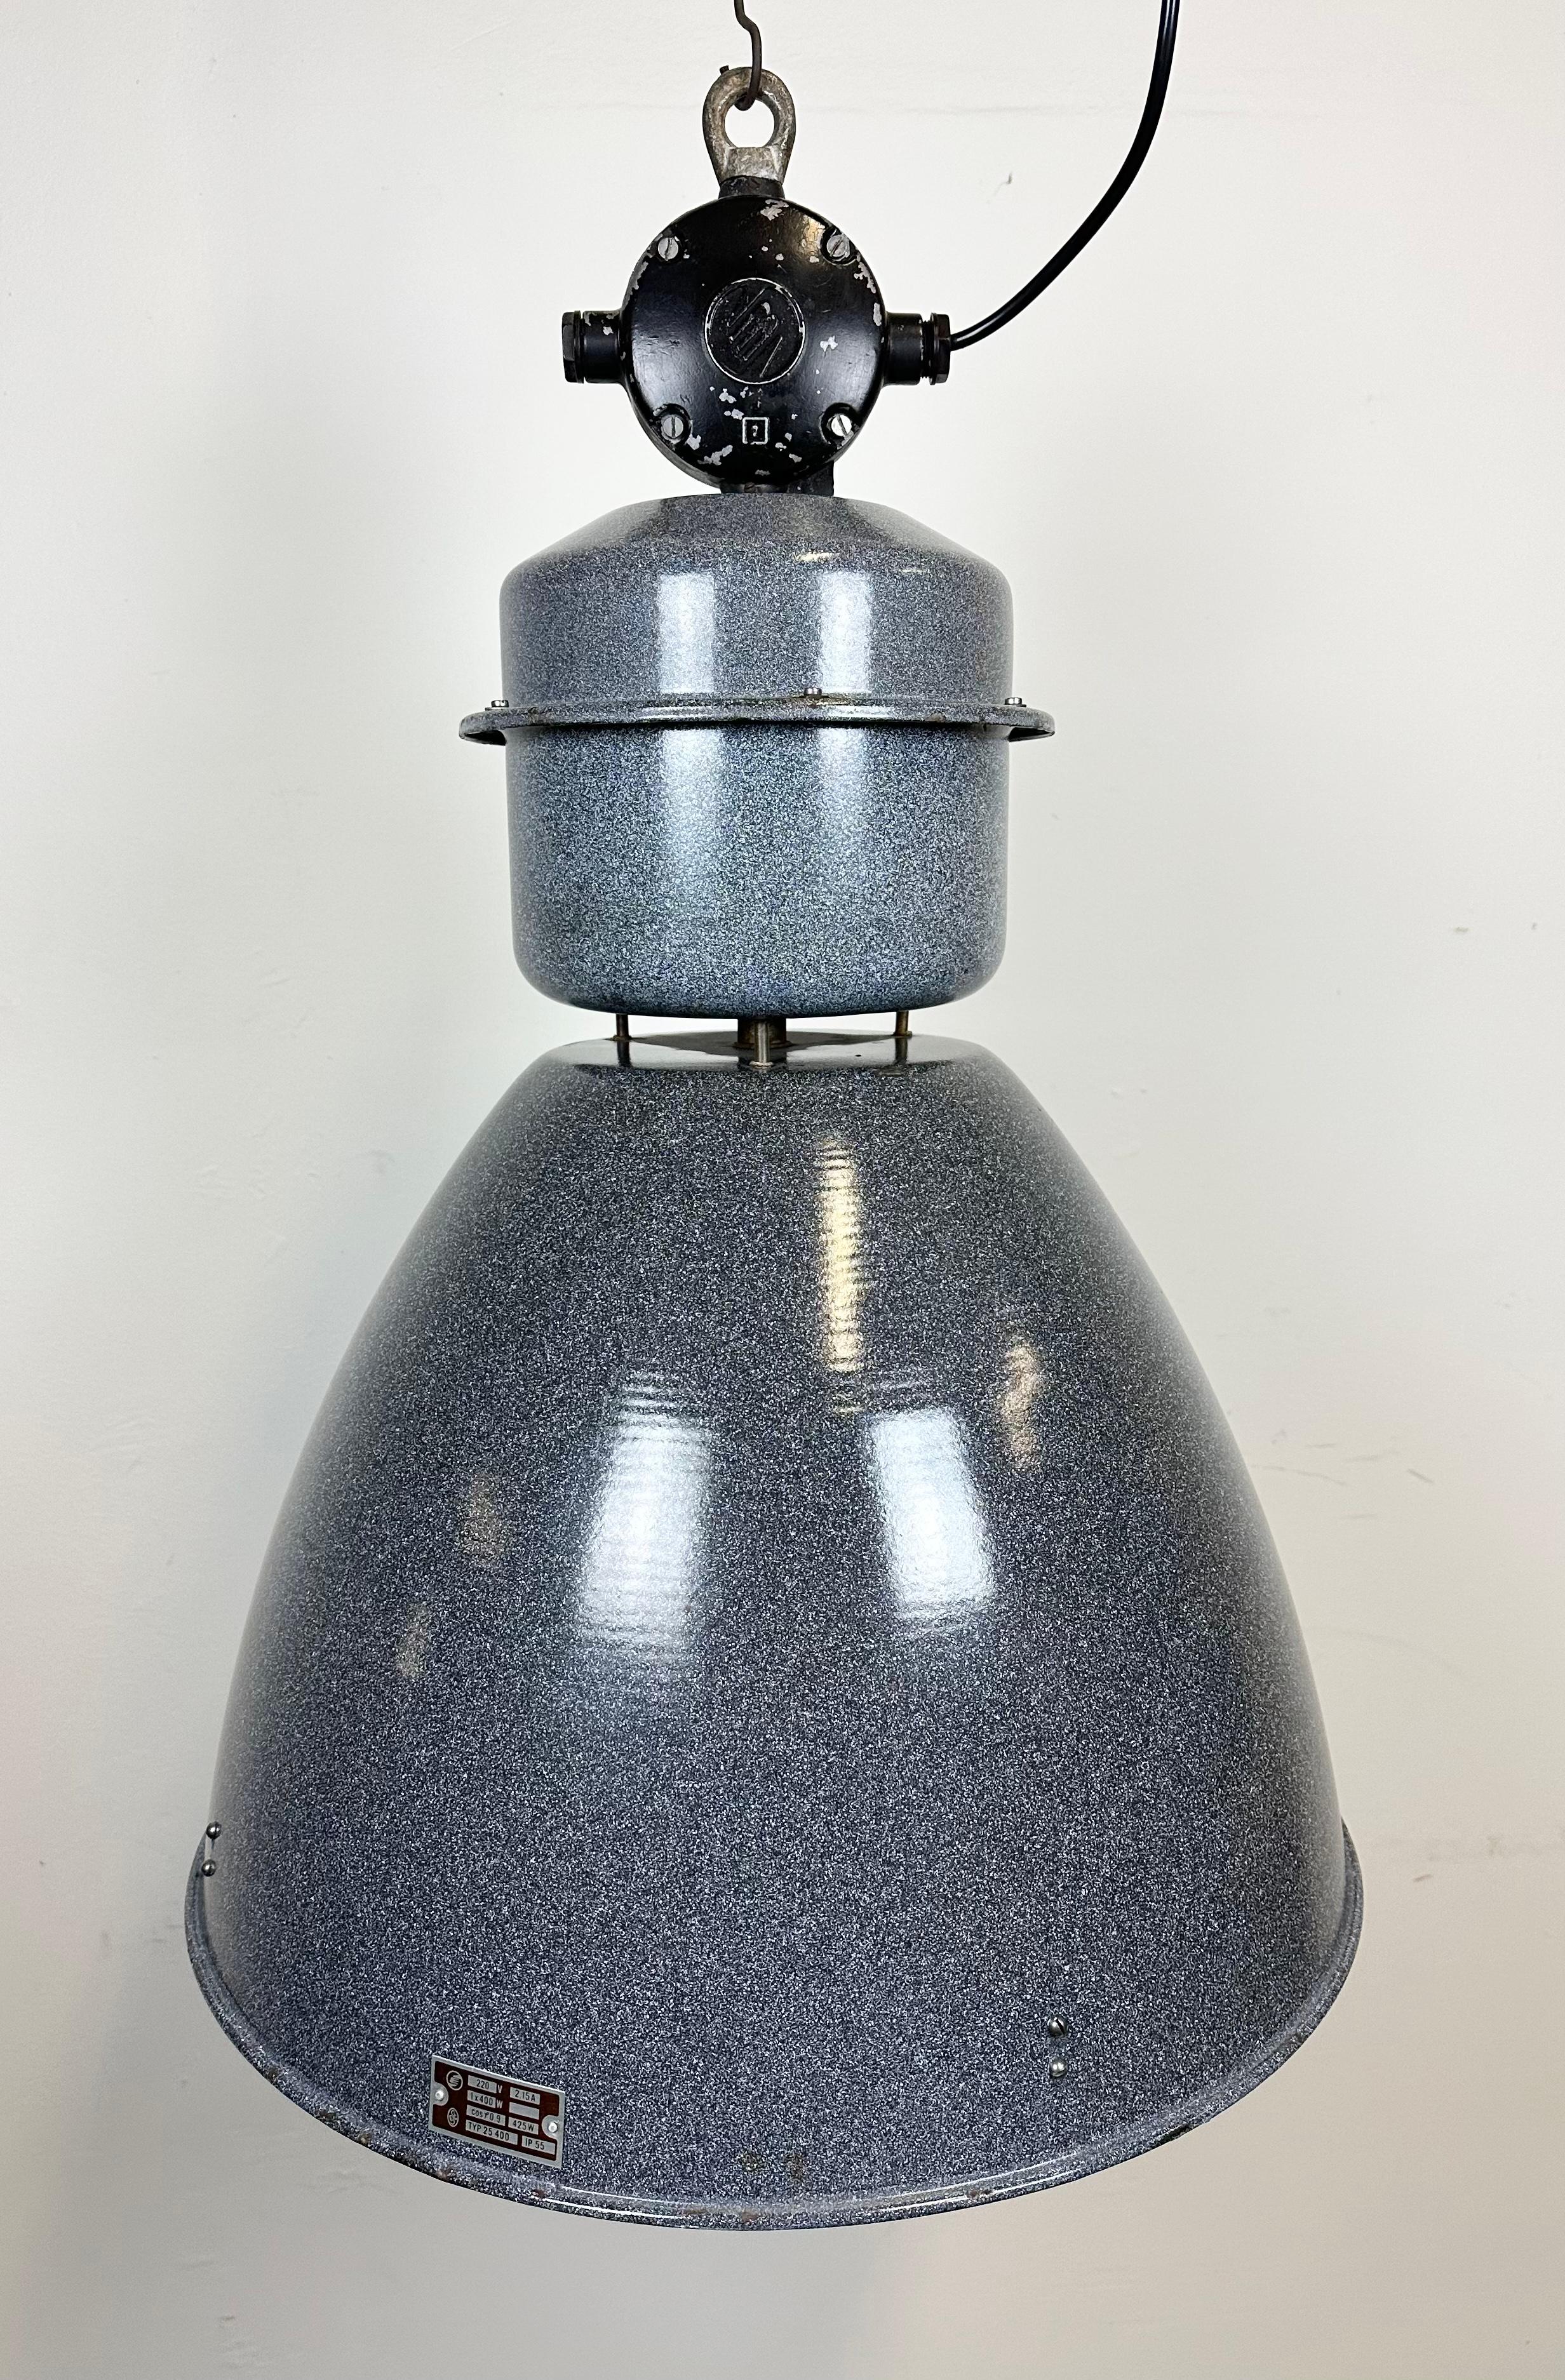 This grey industrial pendant light was designed in the 1960s and produced by Elektrosvit in the former Czechoslovakia. It features a cast aluminum top, a grey enamel exterior and a white enamel interior.
New porcelain socket for E 27 / E 26